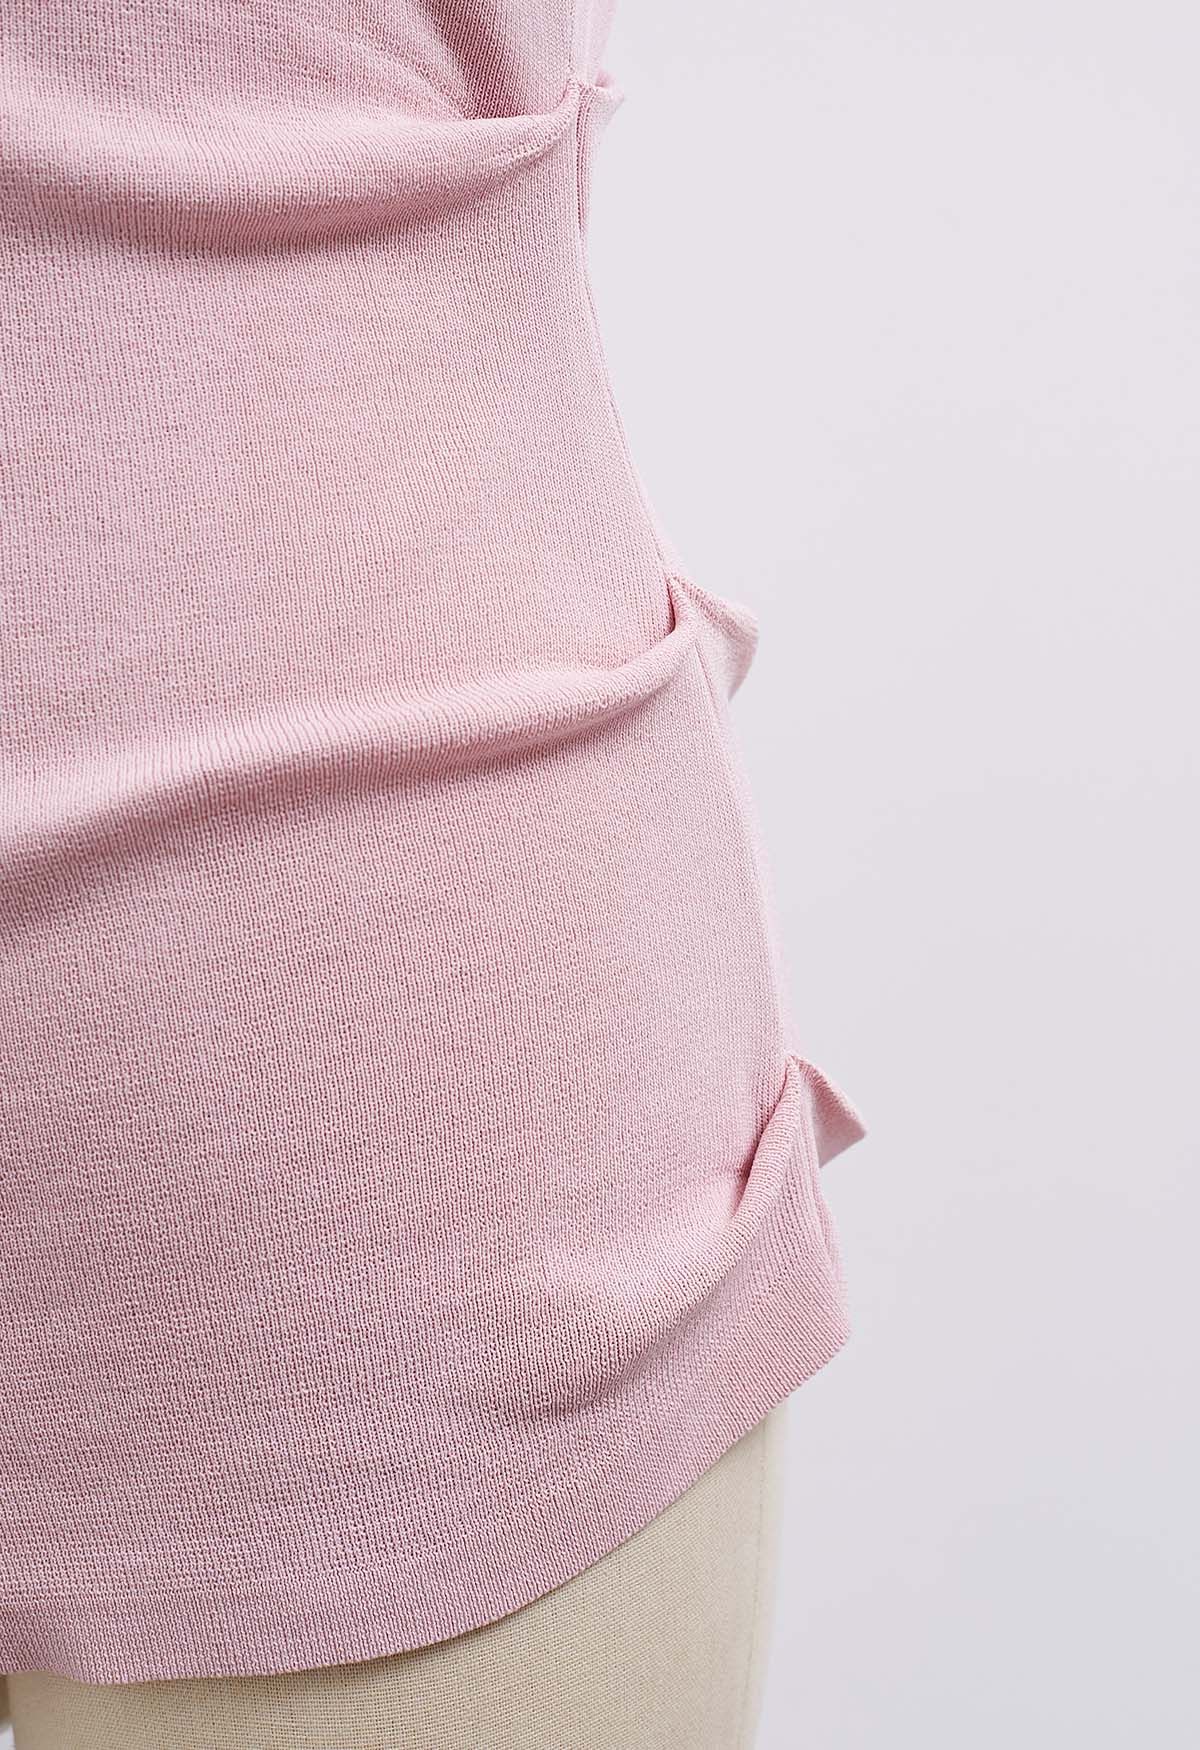 Asymmetric Folded Collar Knit Top in Pink